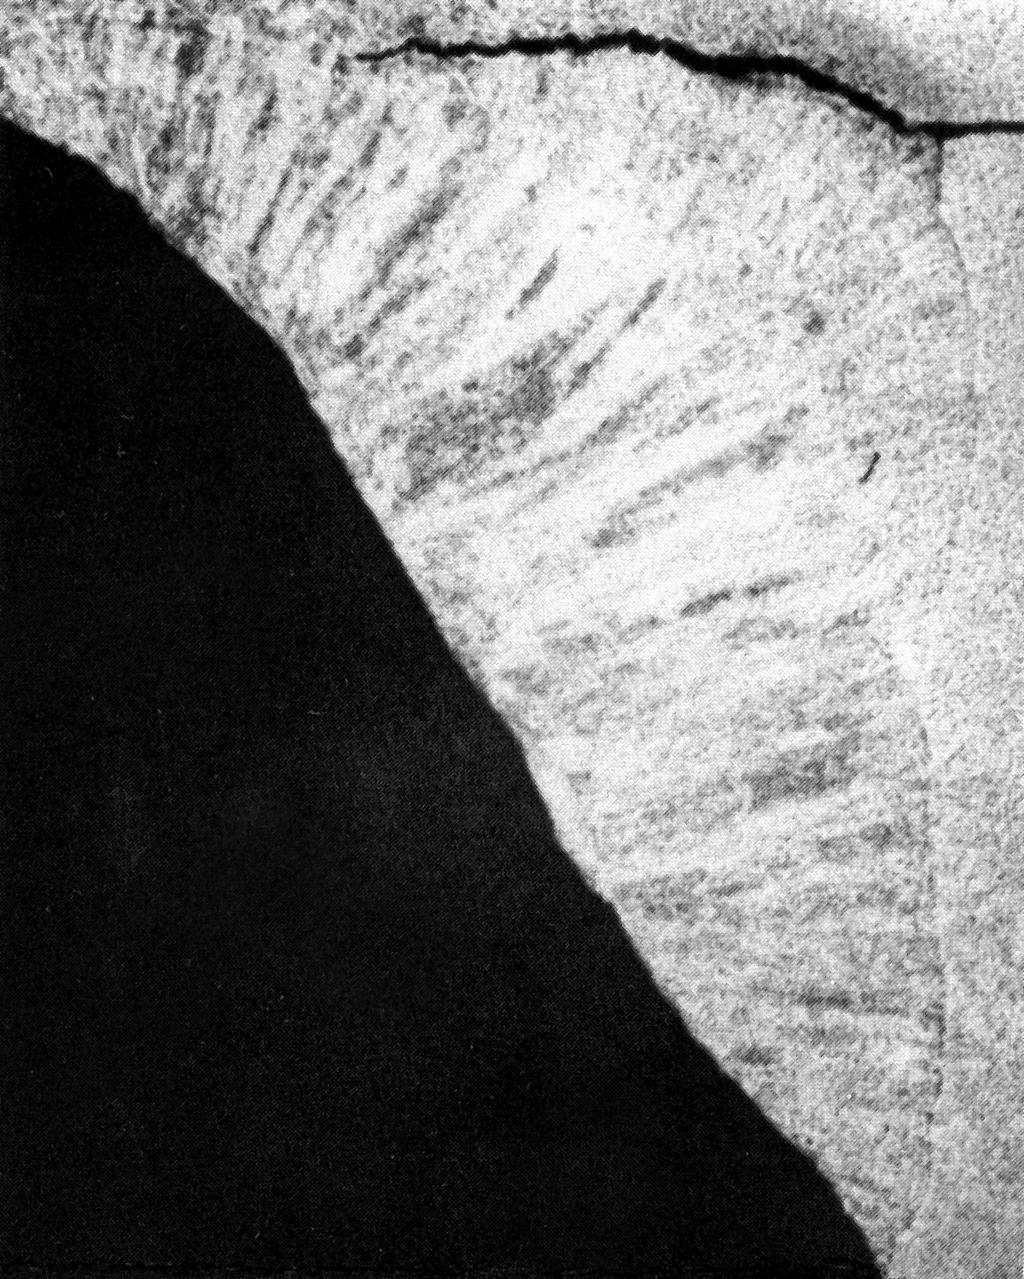 2. Weld Solidification and Cracking Behavior a.) The macrophotograph below shows a crack in the underbead region (Svensson 94).